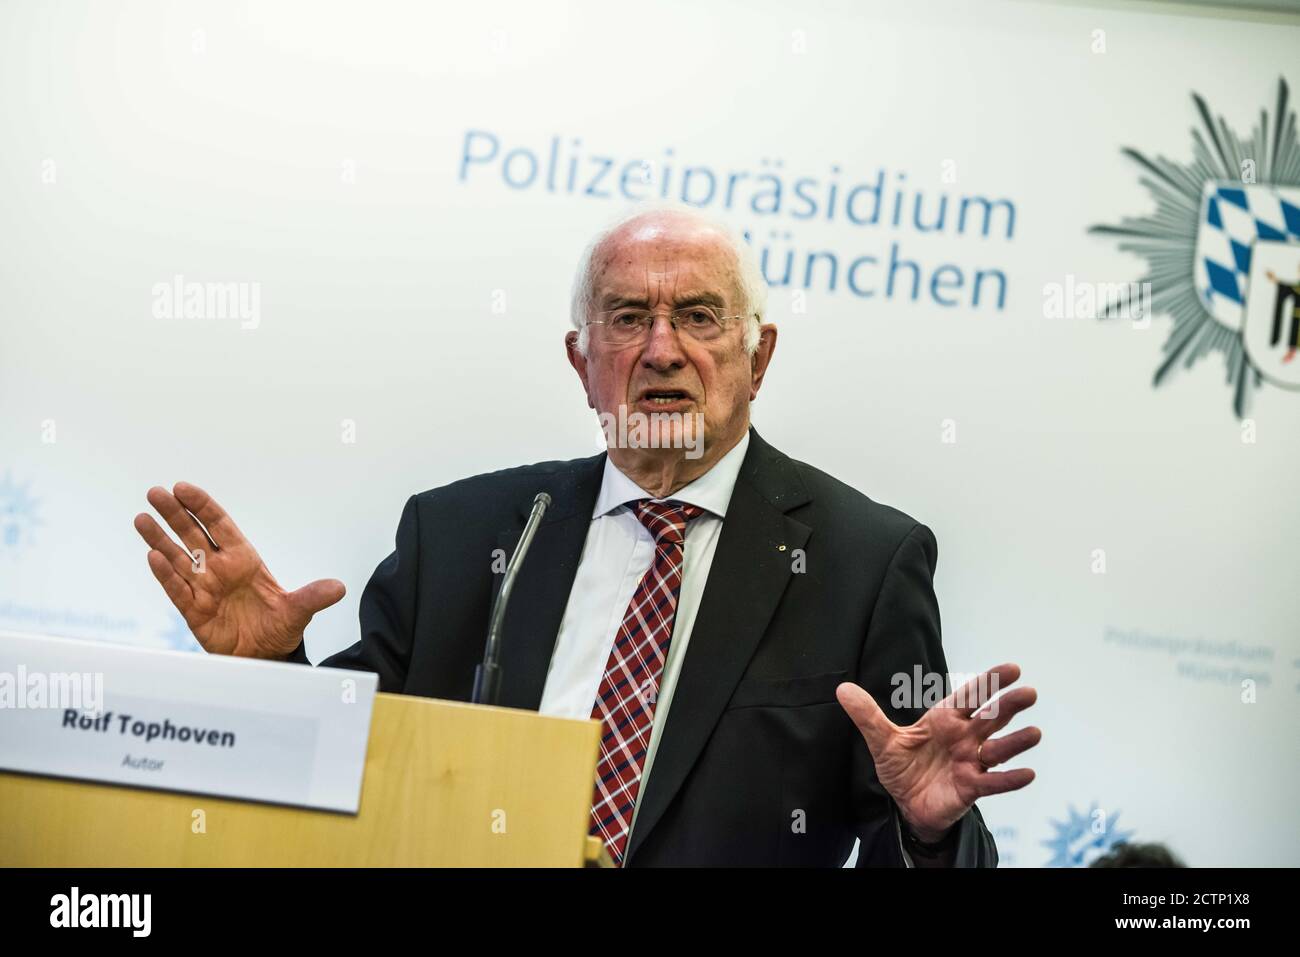 Munich, Bavaria, Germany. 24th Sep, 2020. Author and terror expert ROLF TOPHAVEN.Â Bavarian Interior Minister Joachim Herrmann introduced the new bookÂ ''Islamischer Staat: Geschlagen, nicht besiegt'' (''Islamic State: Beaten, but Not Defeated'') by Dr. Daniel Holz andÂ terrorism expert Rolf Tophoven at the PolizeipraesidiumÂ Munich.Â The trio engaged in aÂ discussion of the Islamic State (IS, ISIS) in an overview, how IS' methodology has changed over the years, and how its terrorist network attempts to spread its influence in the modern era. Credit: Sachelle Babbar/ZUMA Wire/Alamy Live News Stock Photo